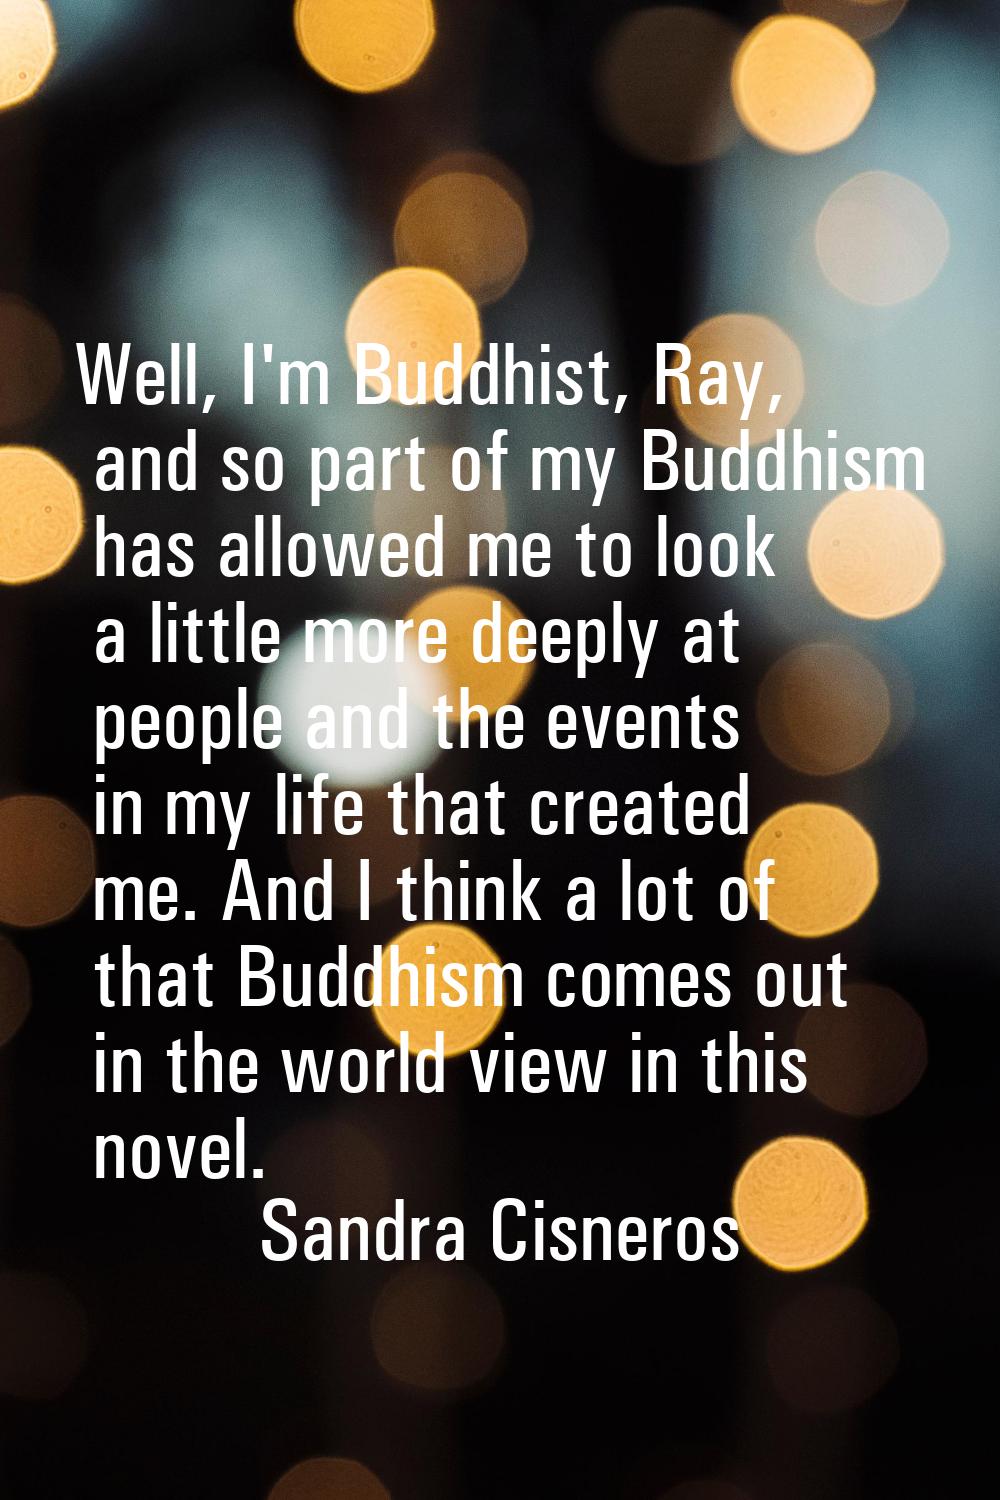 Well, I'm Buddhist, Ray, and so part of my Buddhism has allowed me to look a little more deeply at 